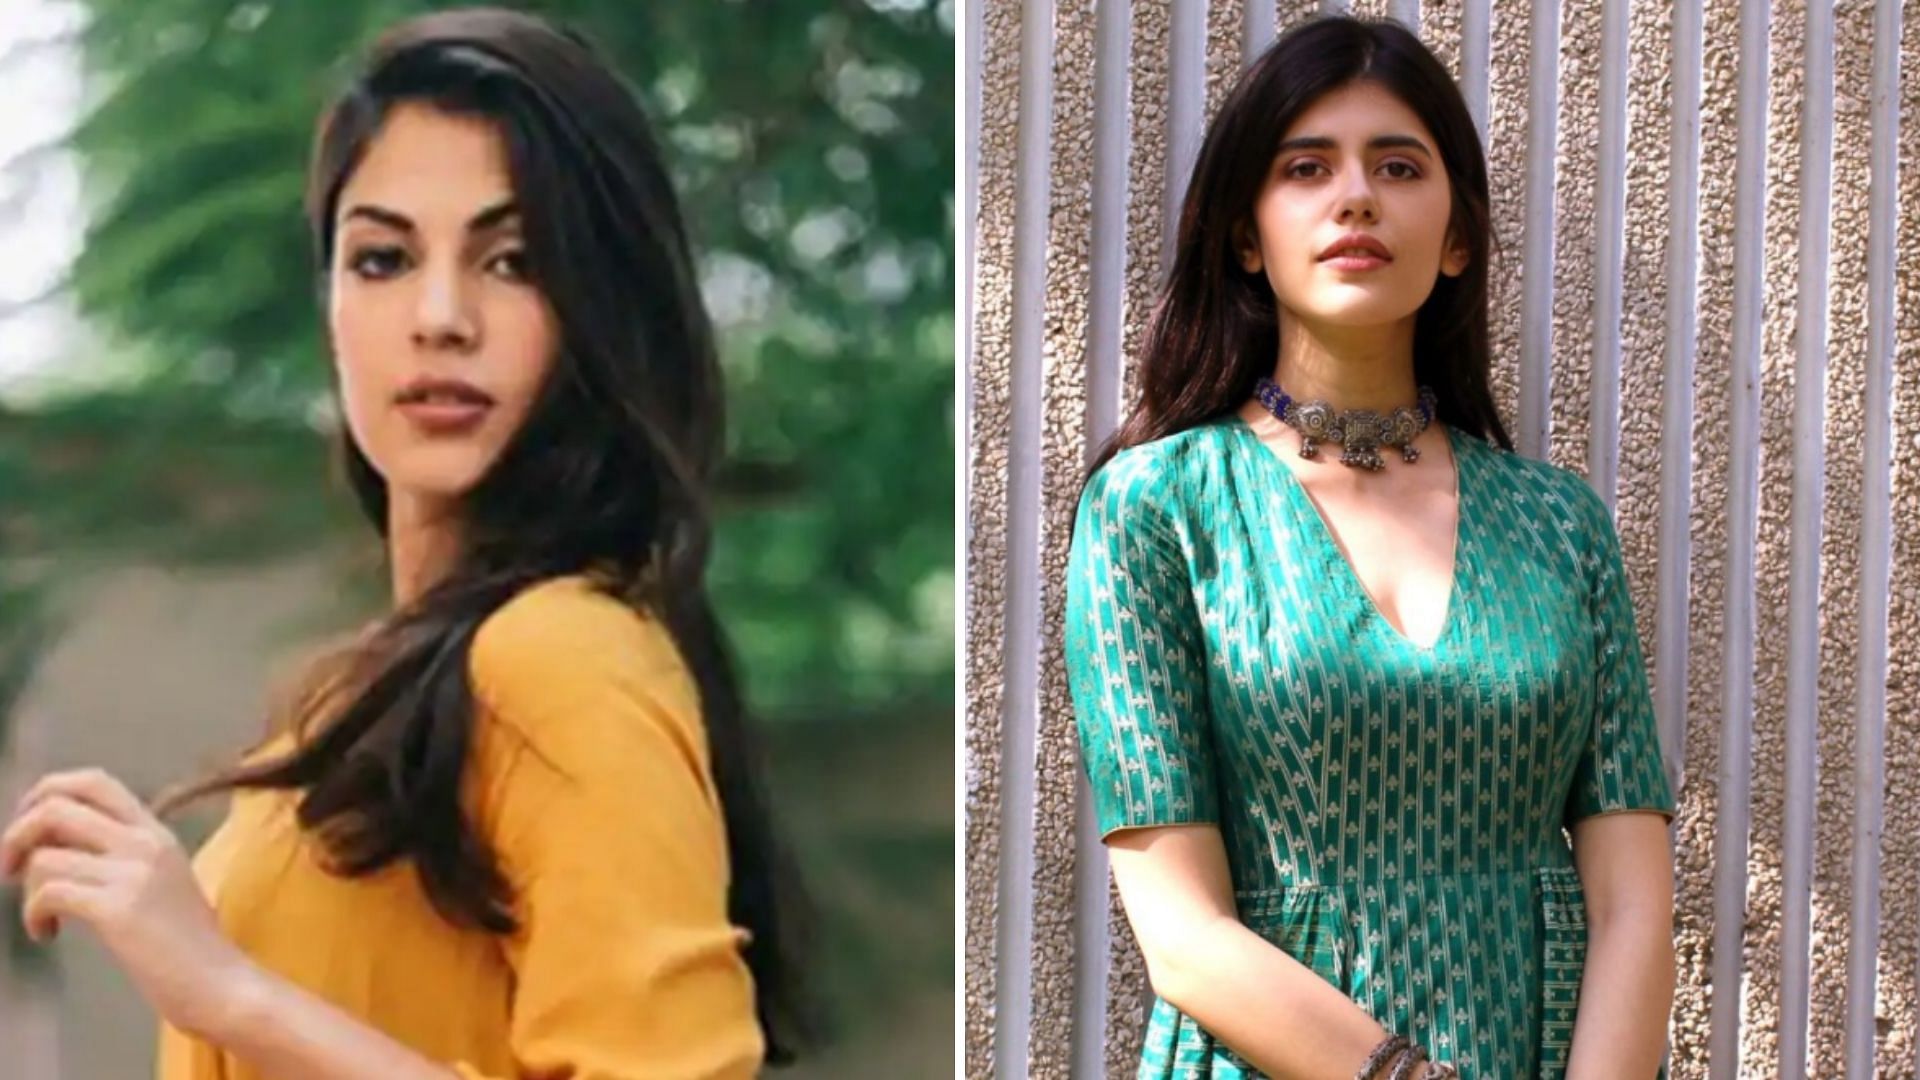 Sanjana Sanghi responds to Rhea's claims on 'Me Too' allegations against Sushant Singh Rajput.